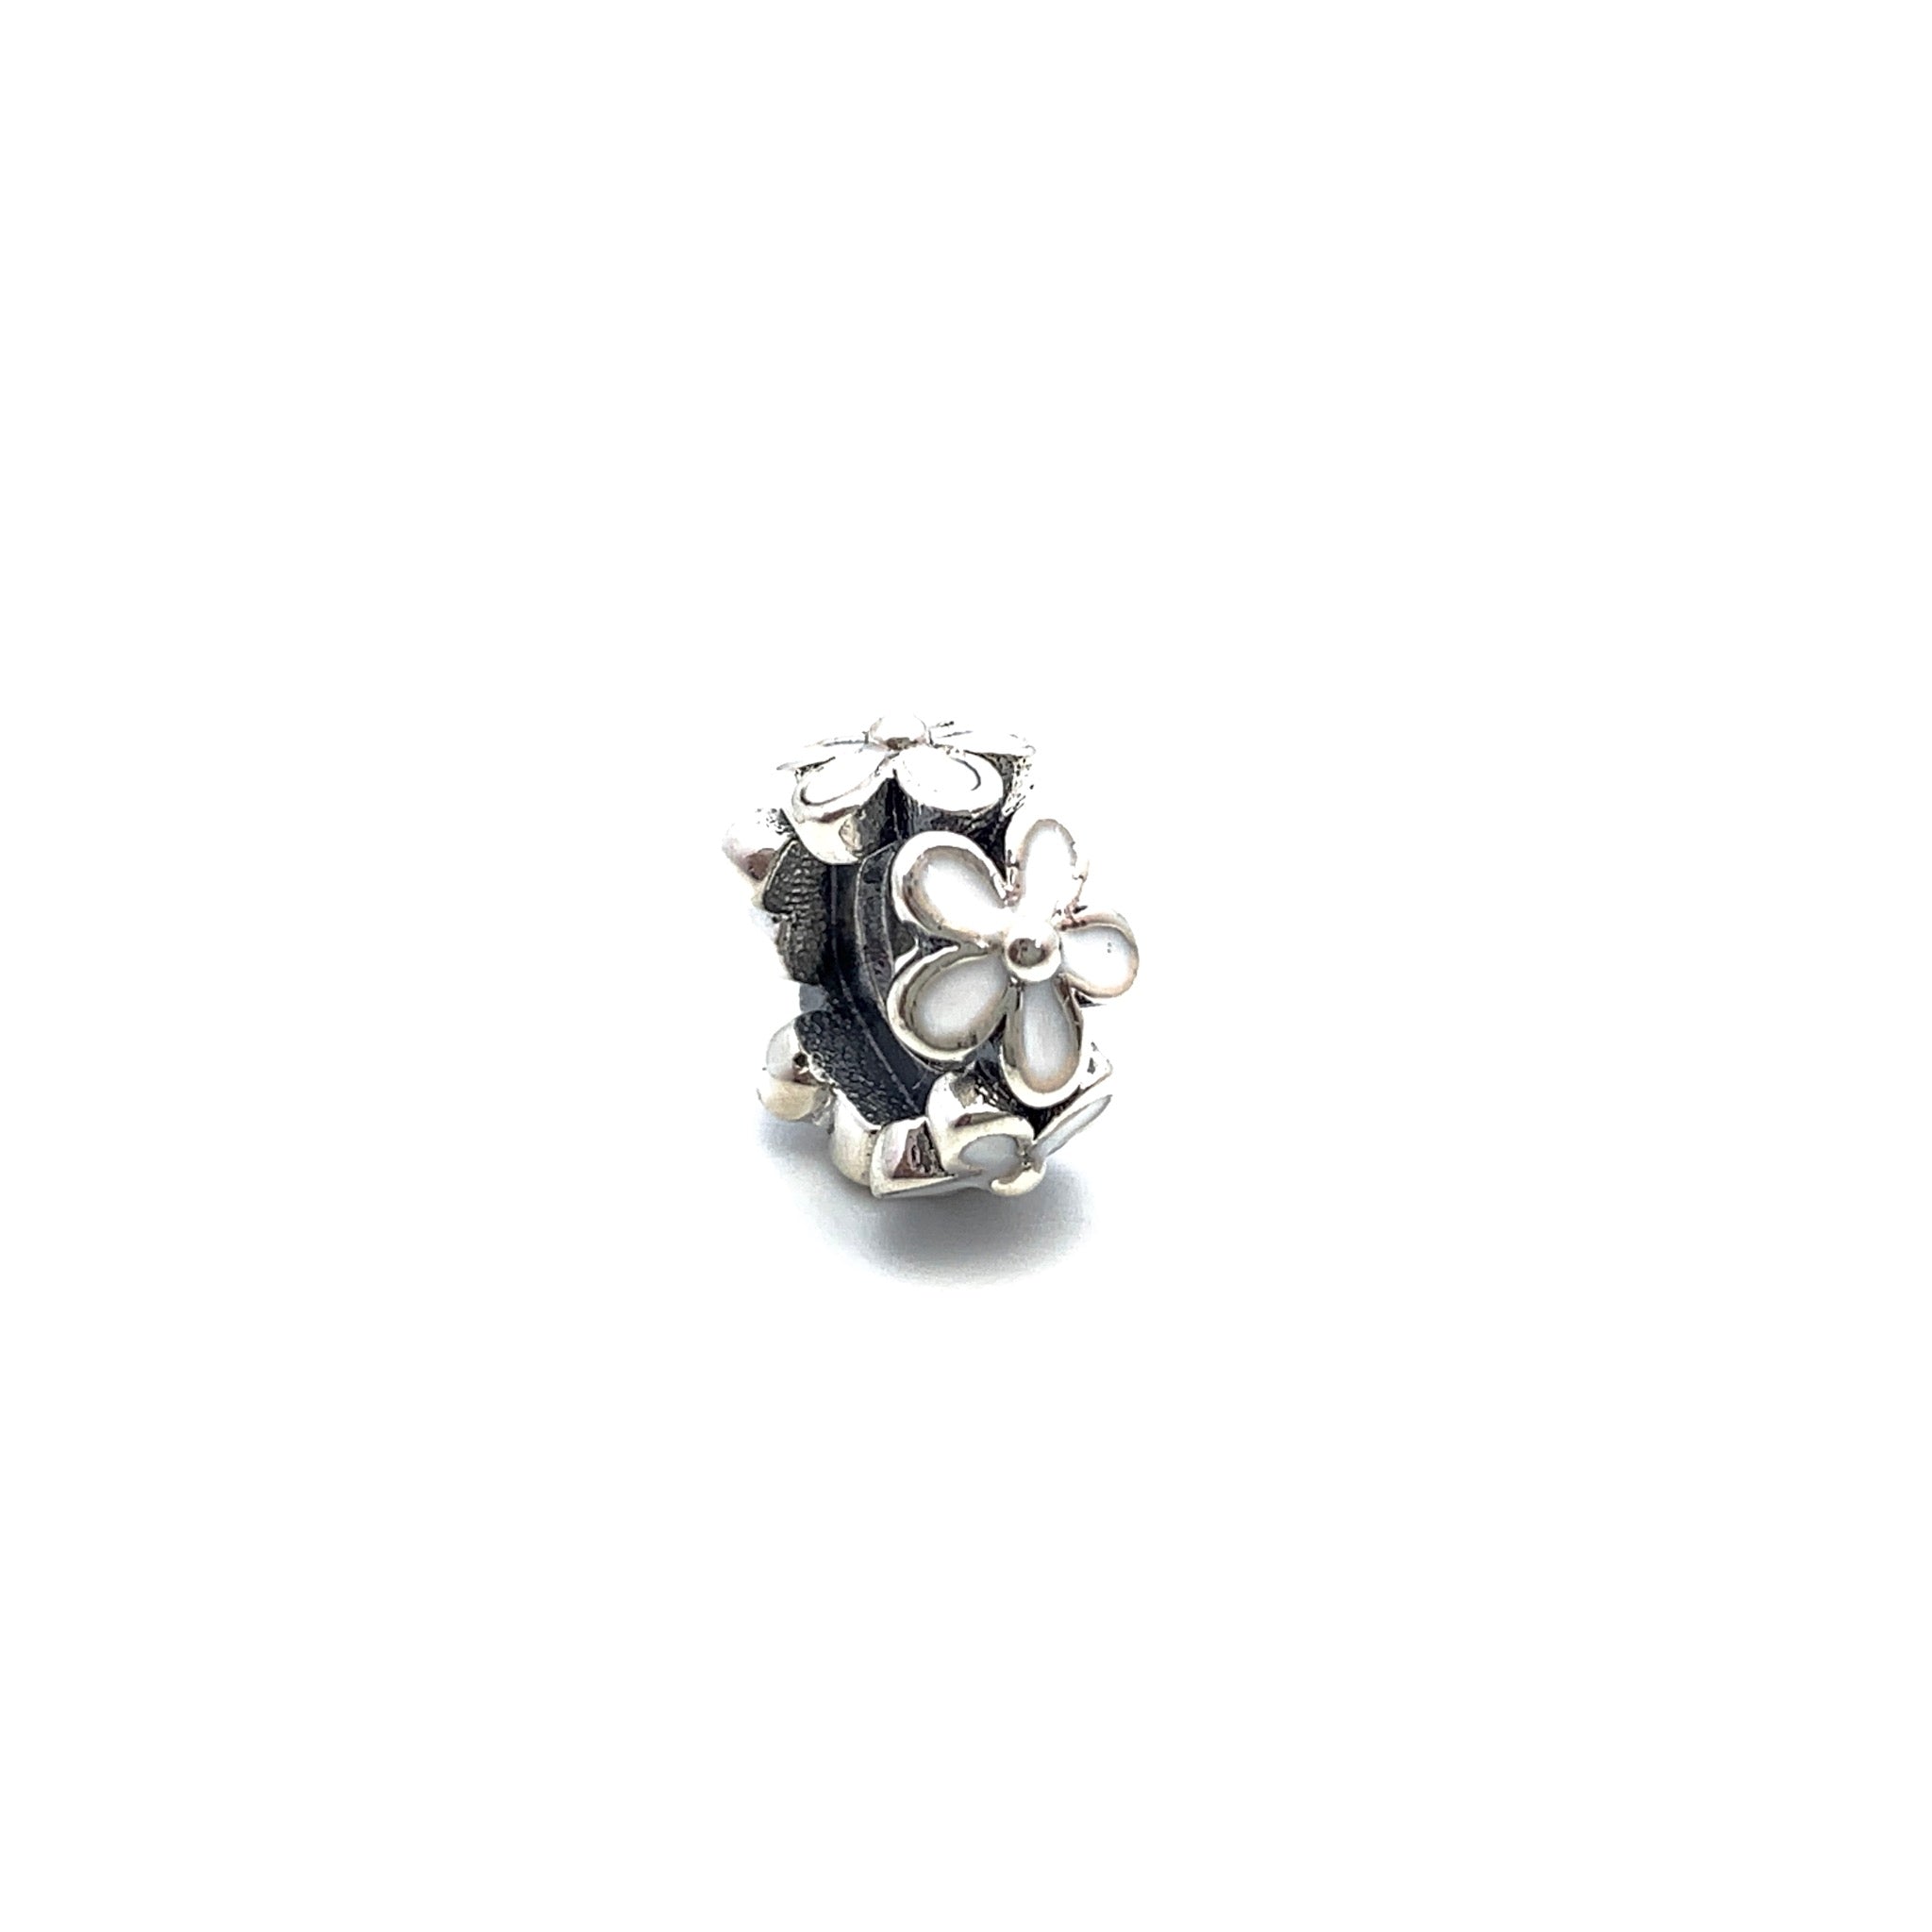 Daisy Crown Spacer - Stone Heart 